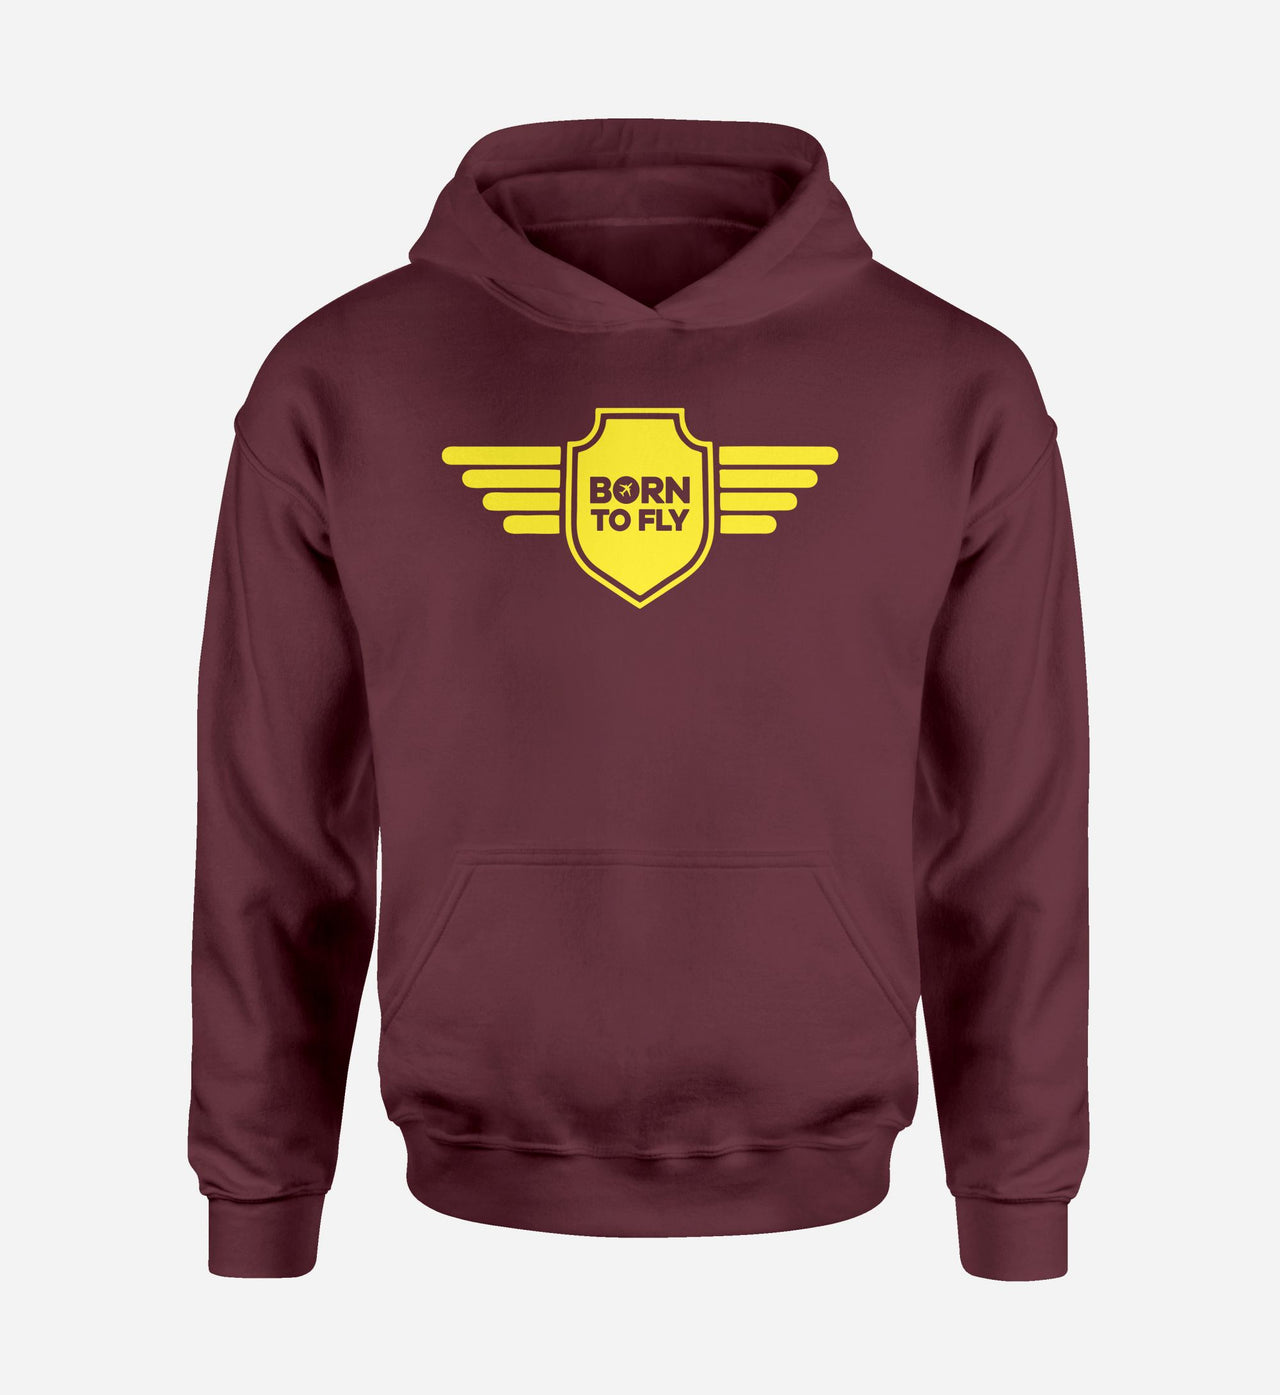 Born To Fly & Badge Designed Hoodies